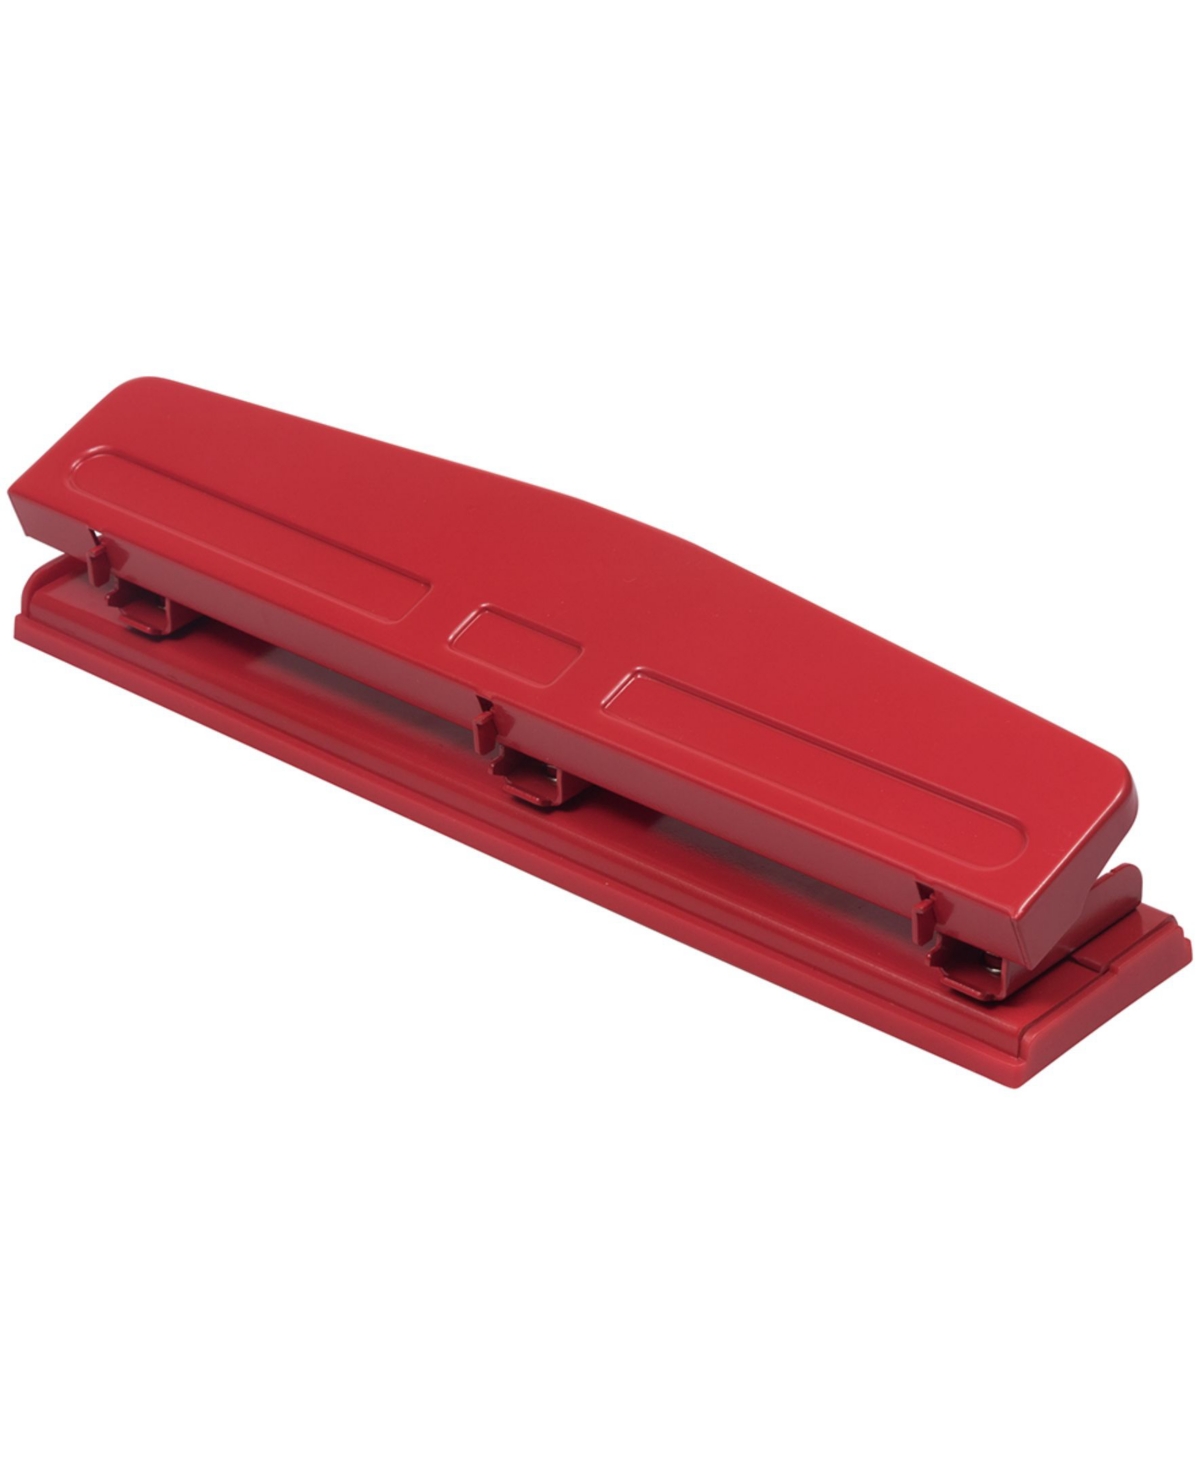 Jam Paper Metal 3 Hole Punch In Red